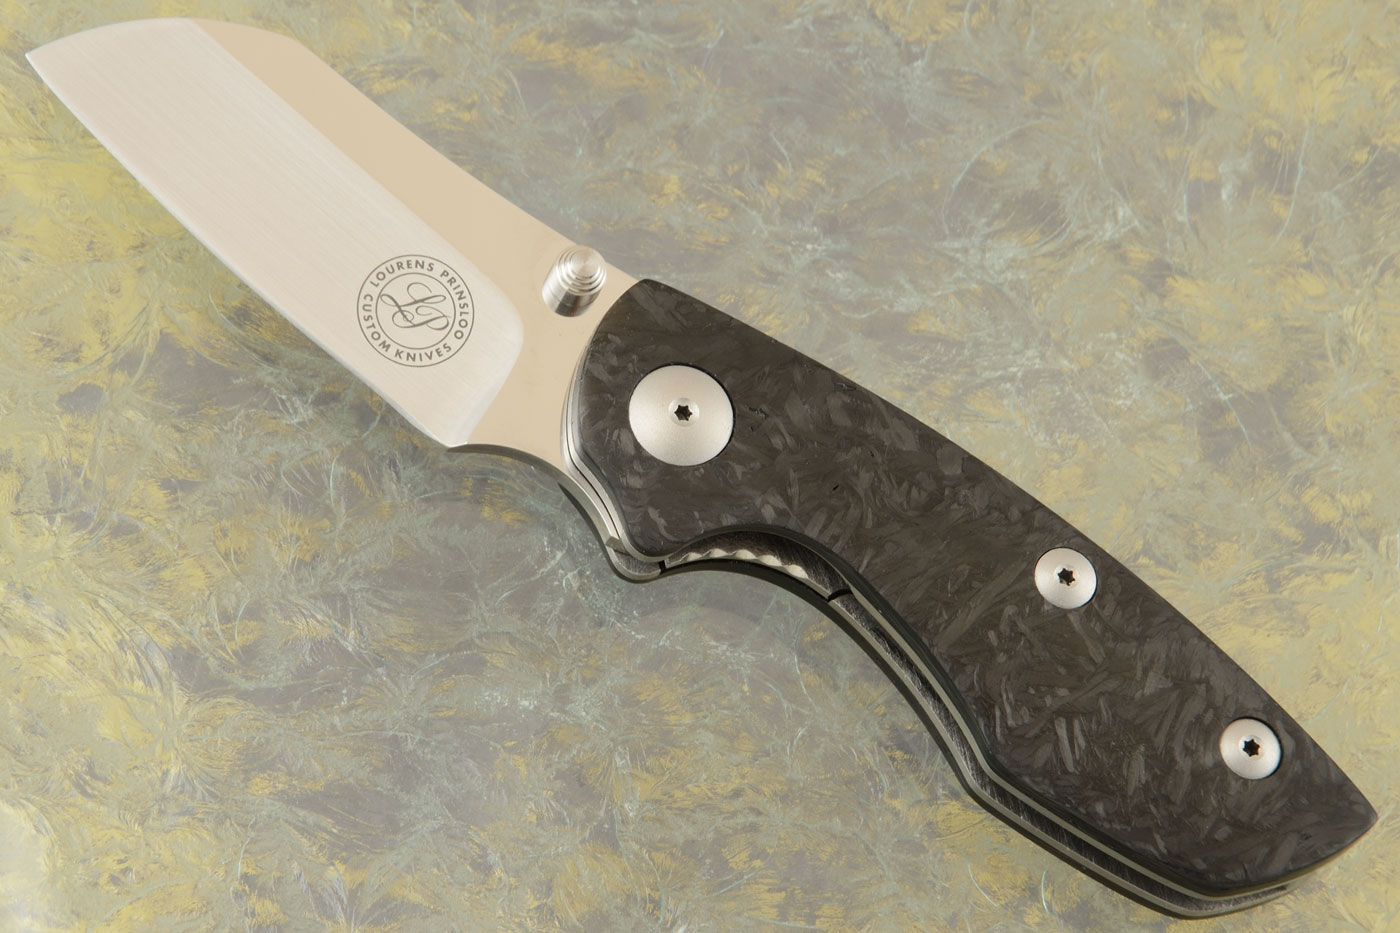 Sheepsfoot Folder with Marble Carbon Fiber